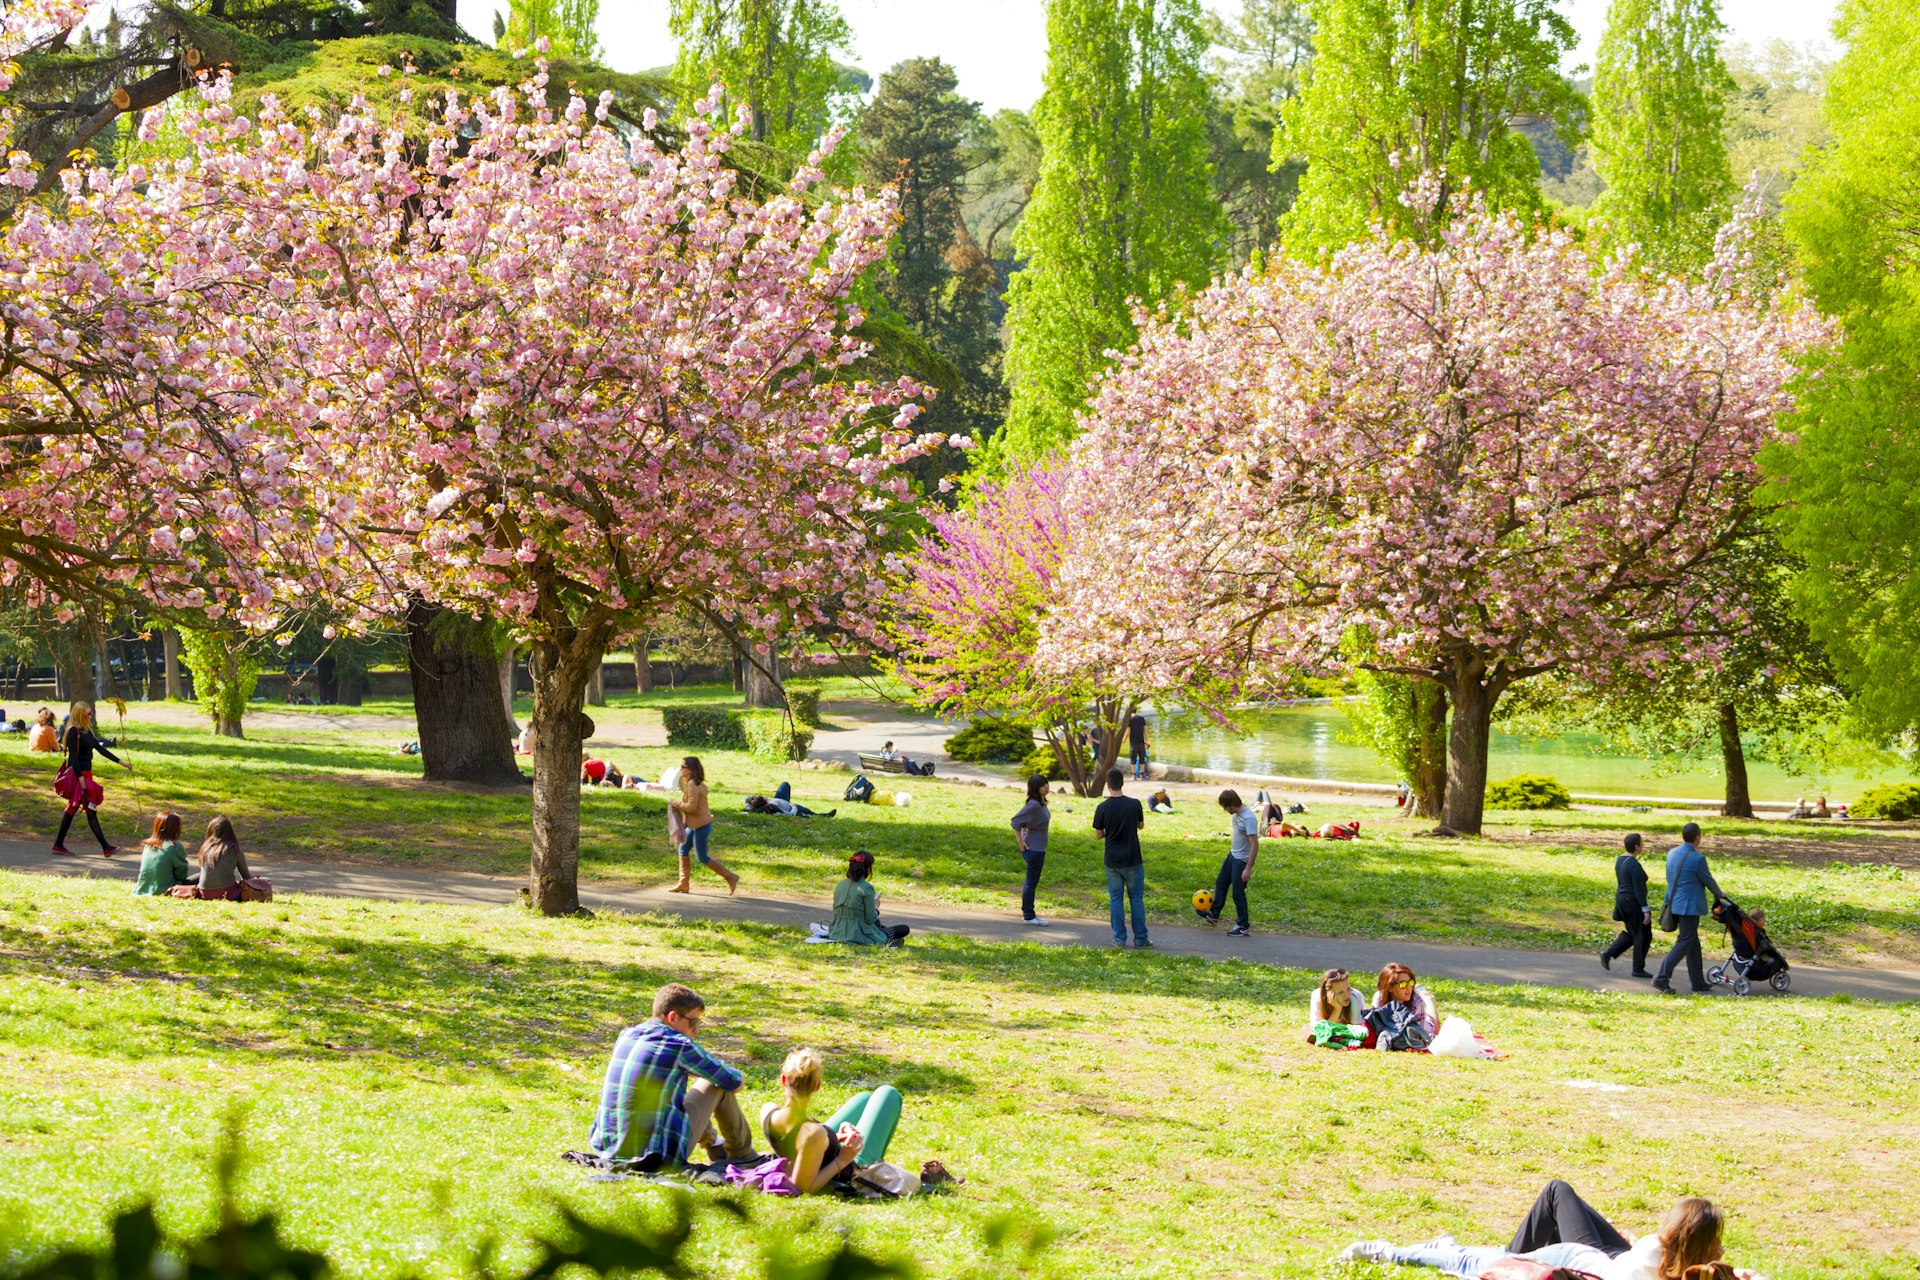 People relax under pink-blossom trees or play games on the grass in parkland